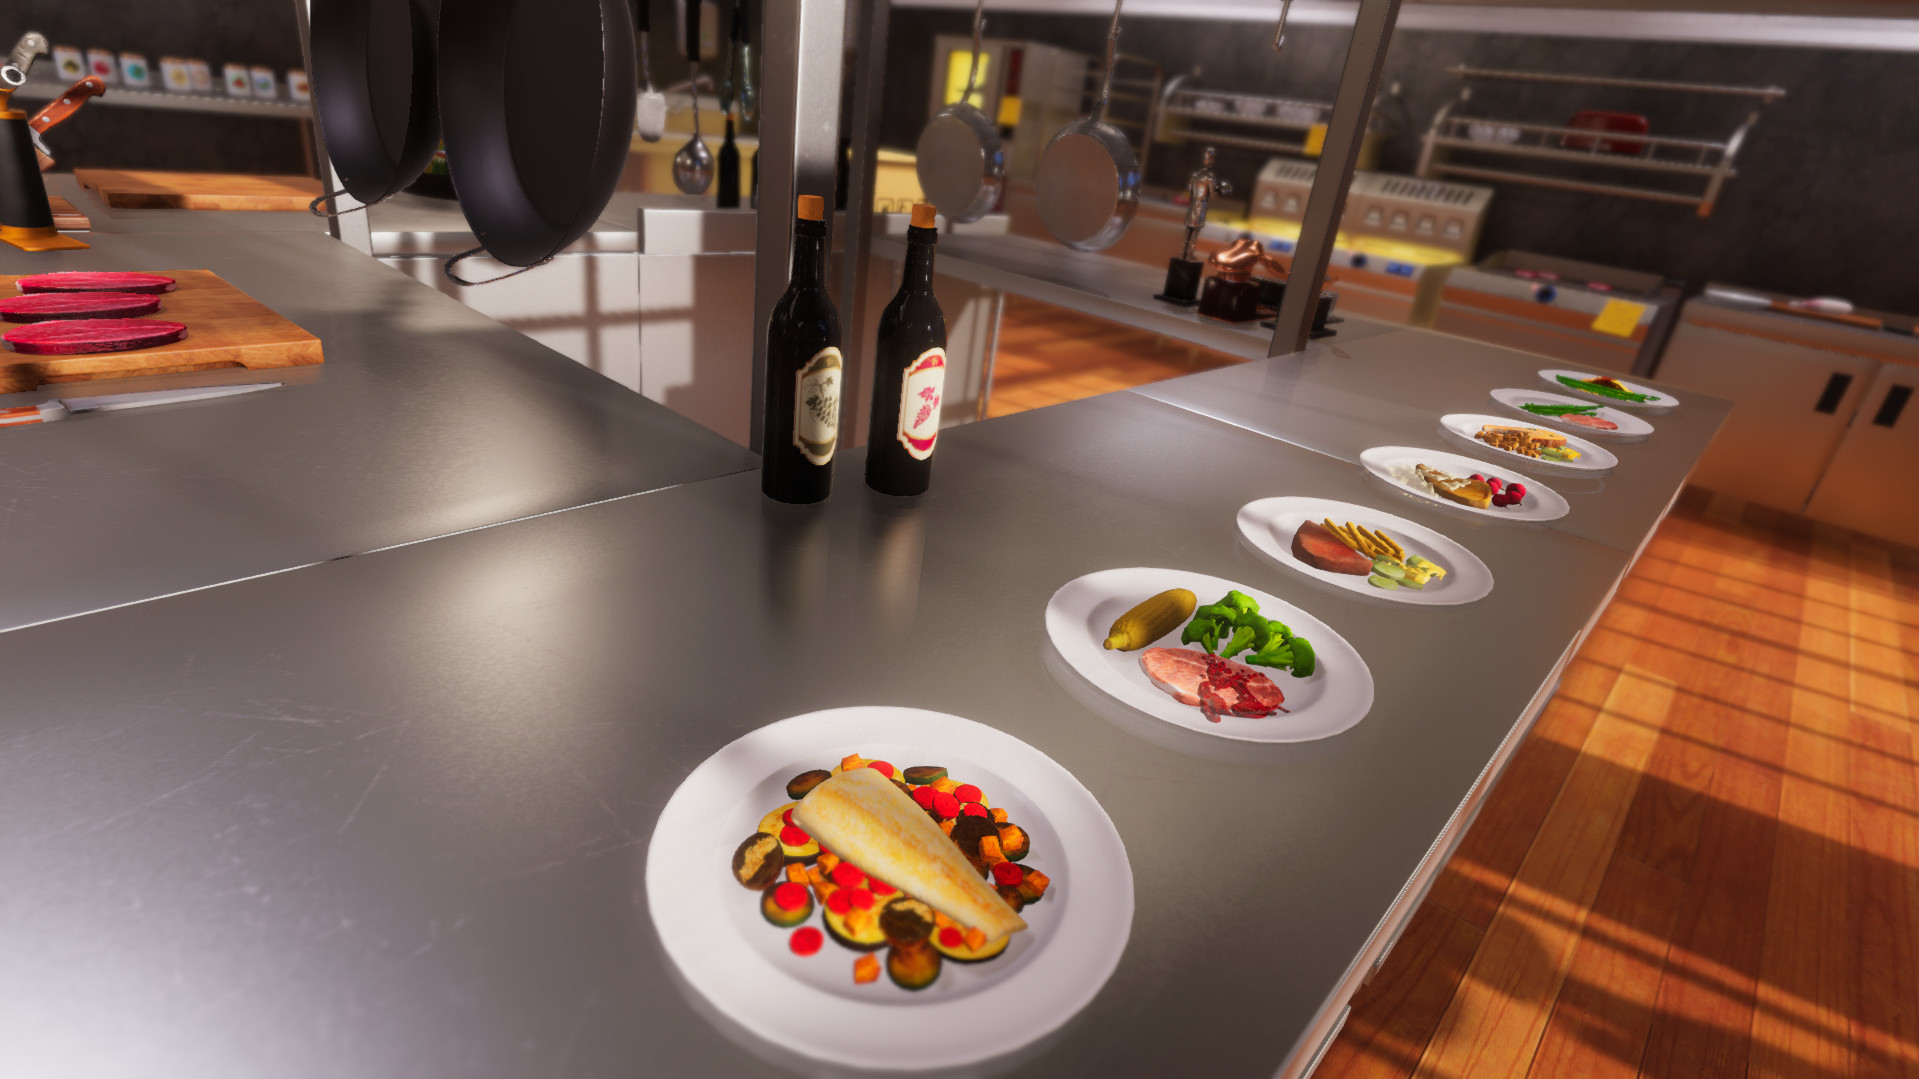 Cooking Simulator VR System Requirements - Can I Run It